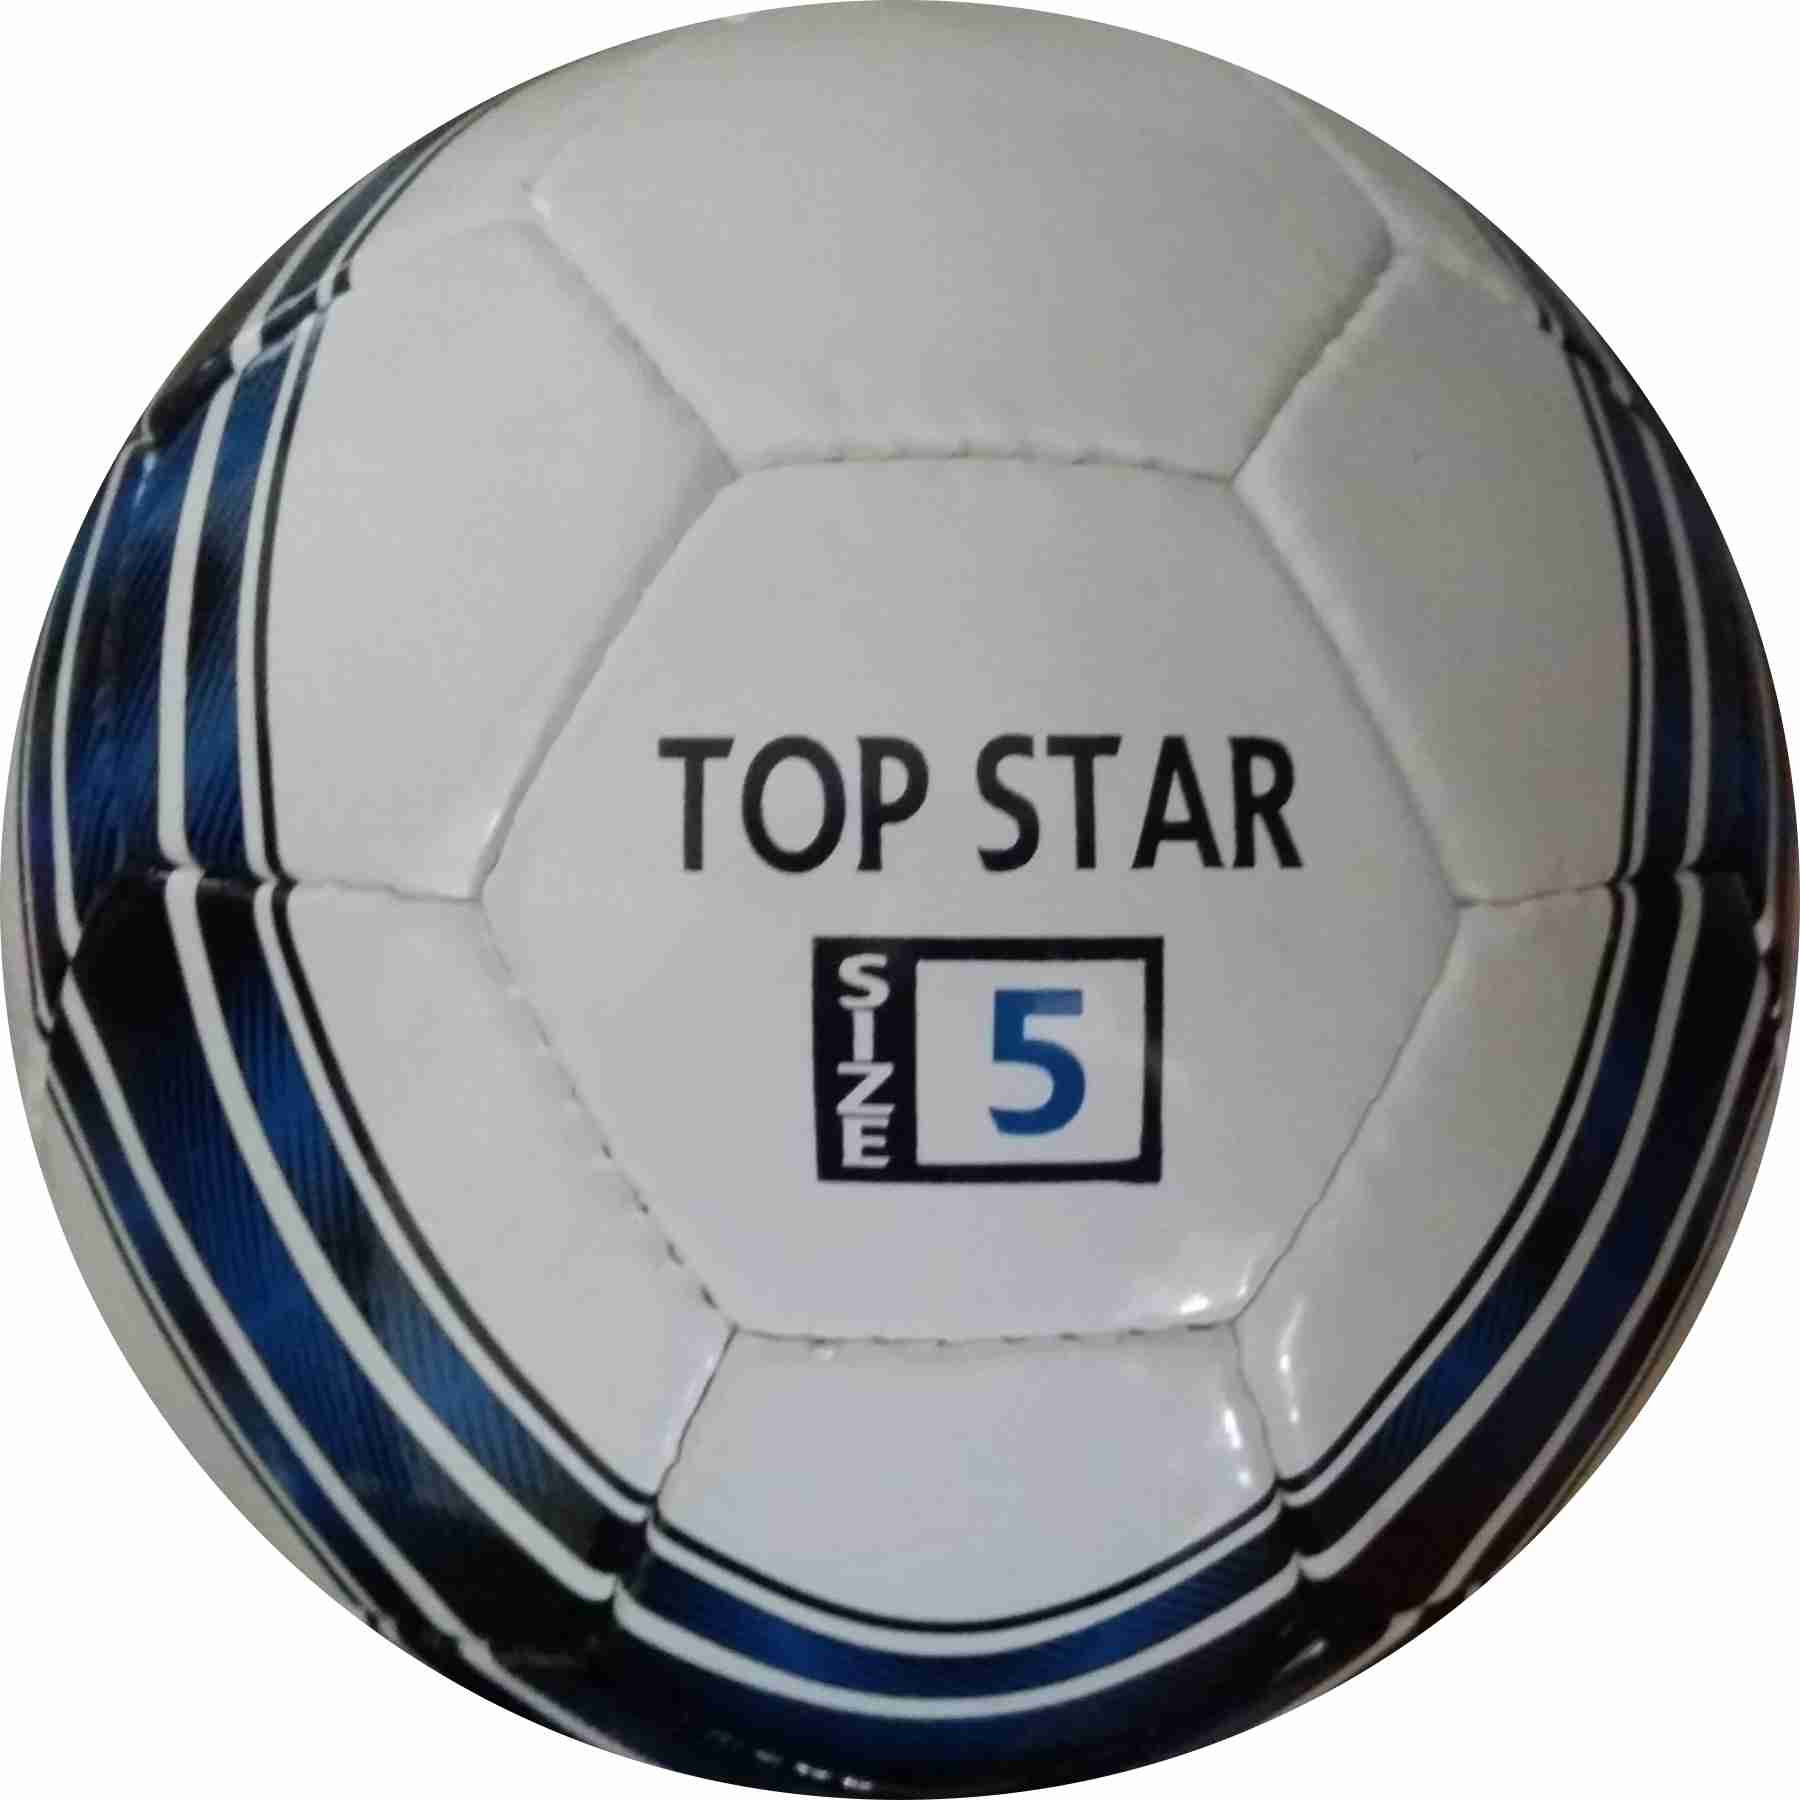 Perrini Top Star Indoor Outdoor Sports Blue Black Soccer Traning Ball Size 5